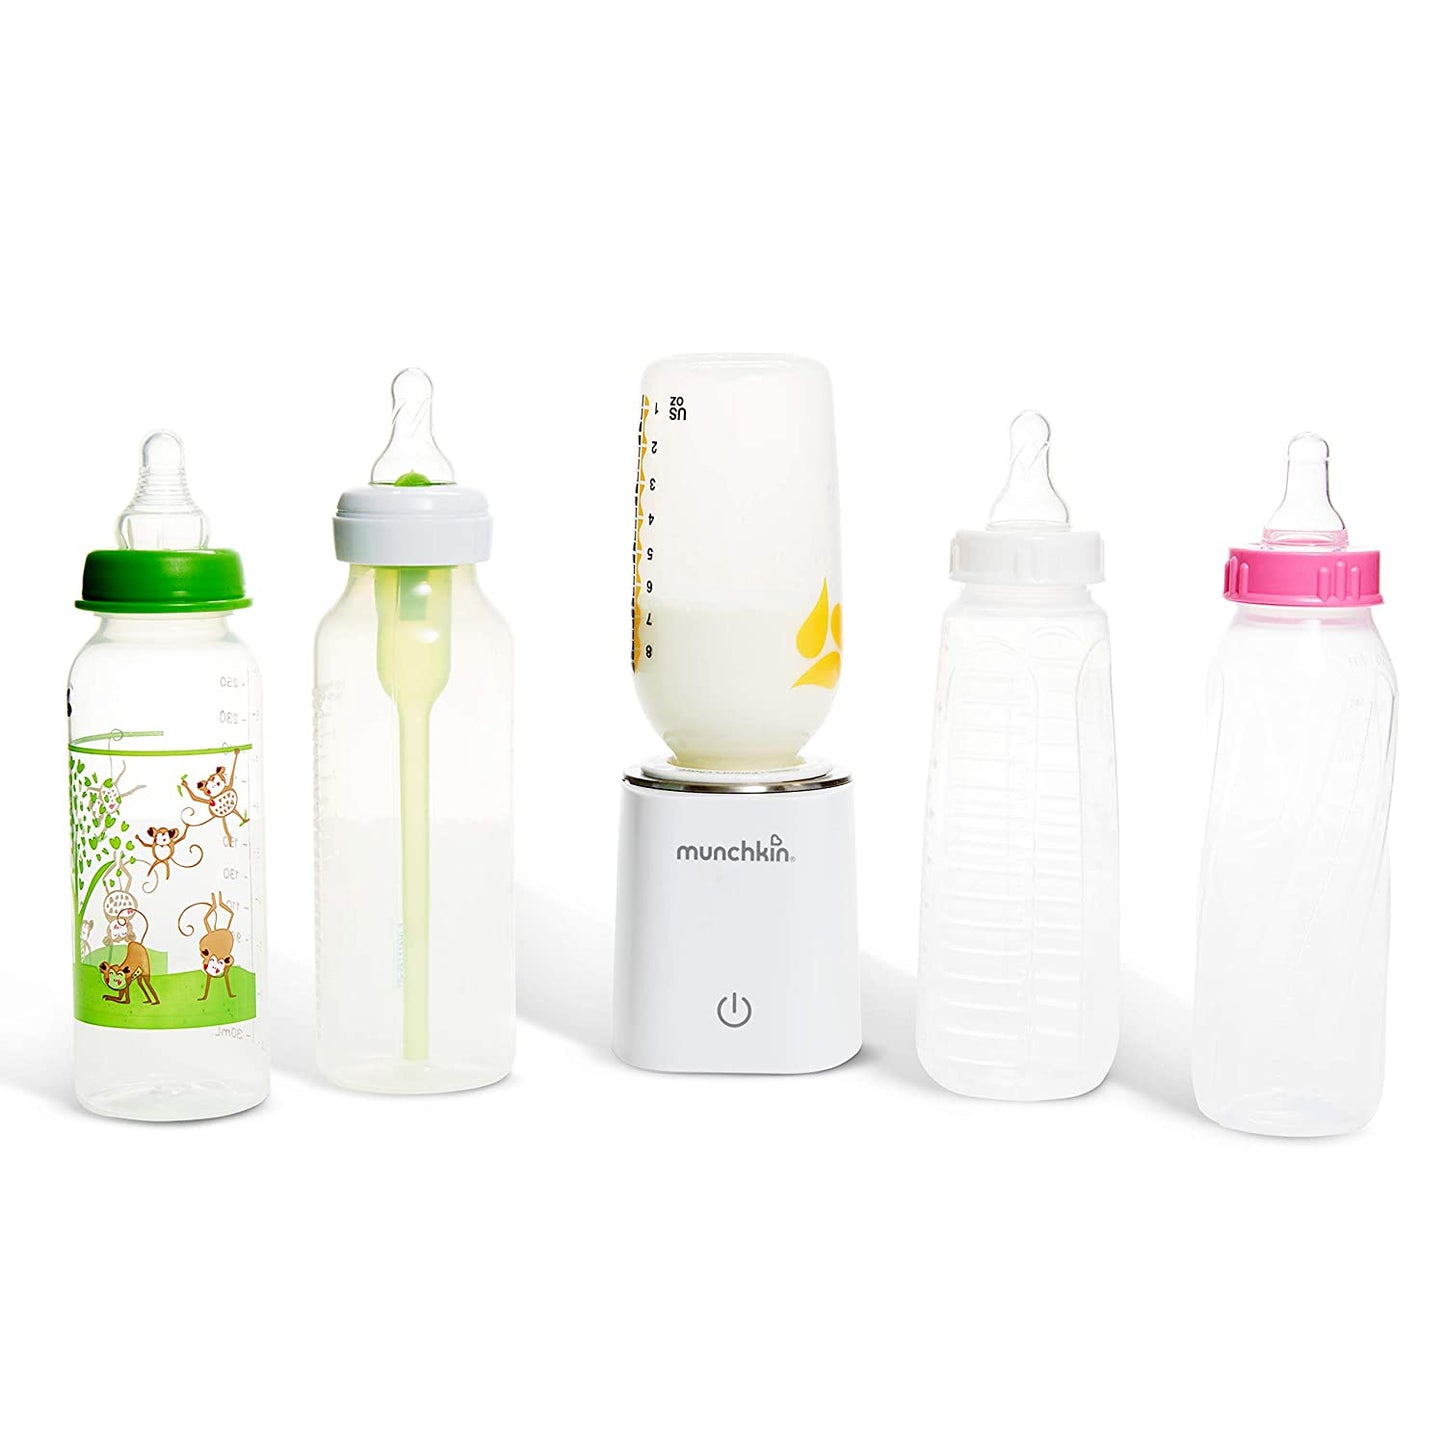 Munchkin 98° Digital Bottle Warmer and Adapter for Playtex Ventaire Baby Bottles